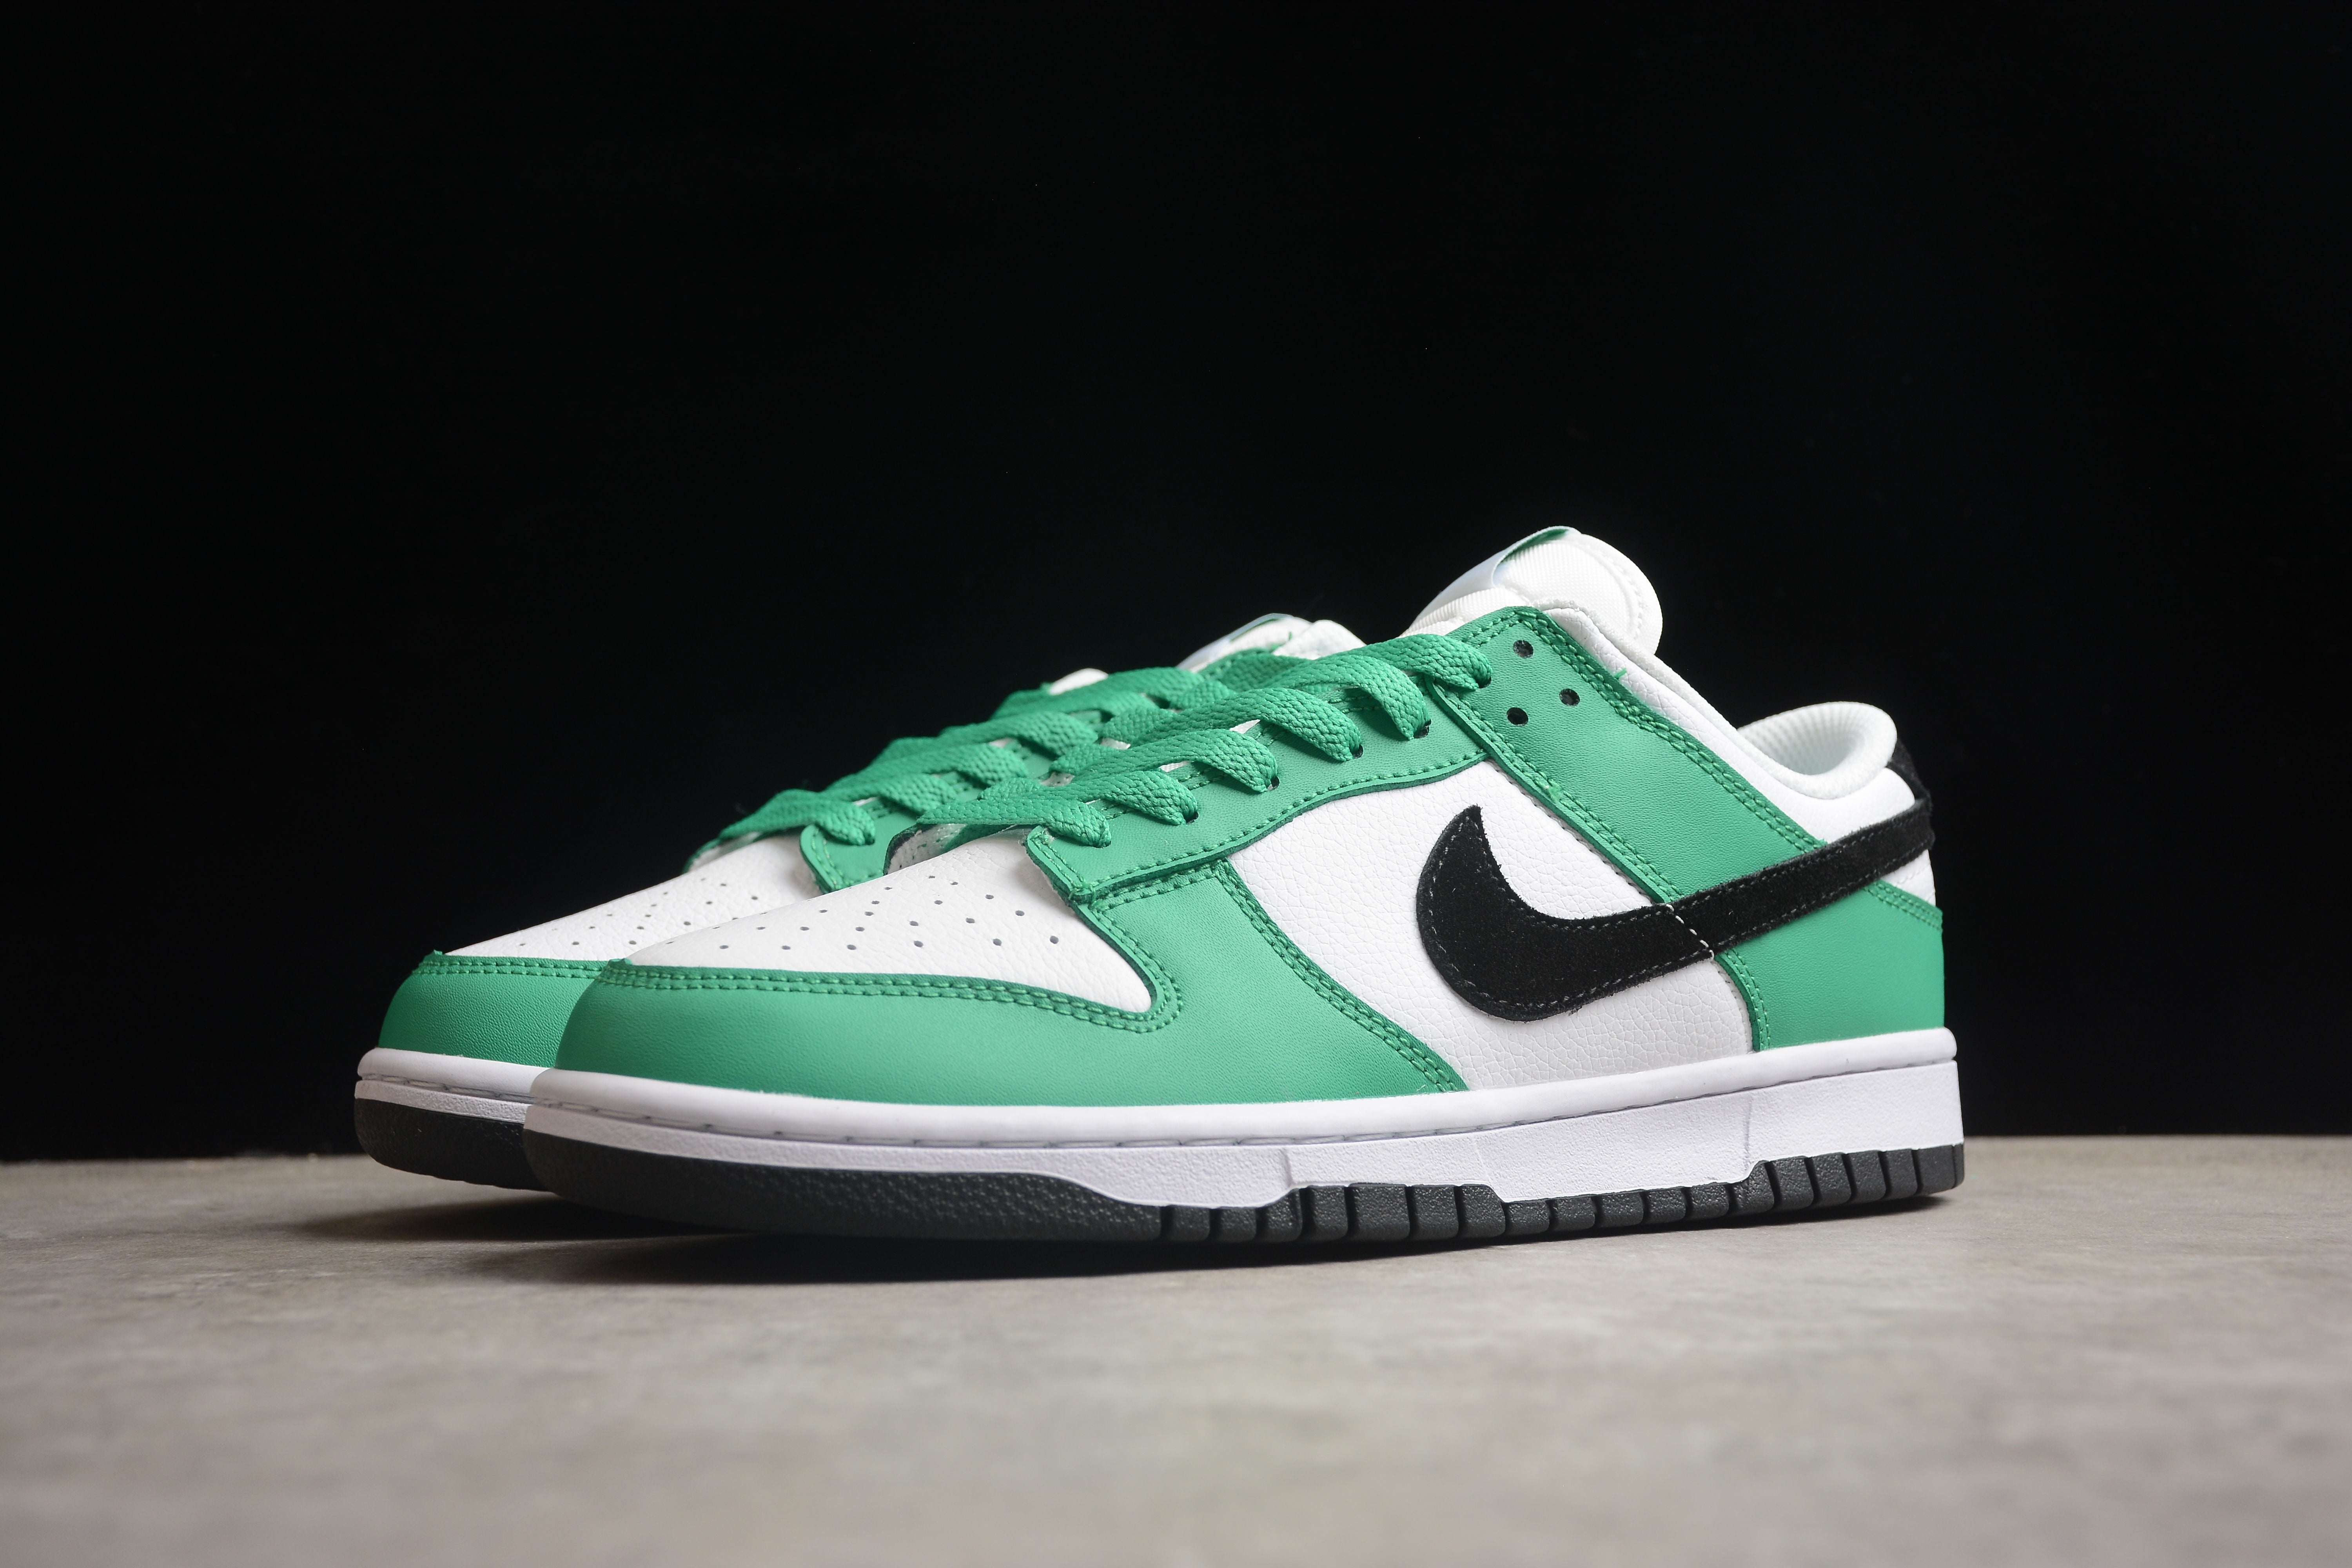 Nike SB dunk low lottery green shoes